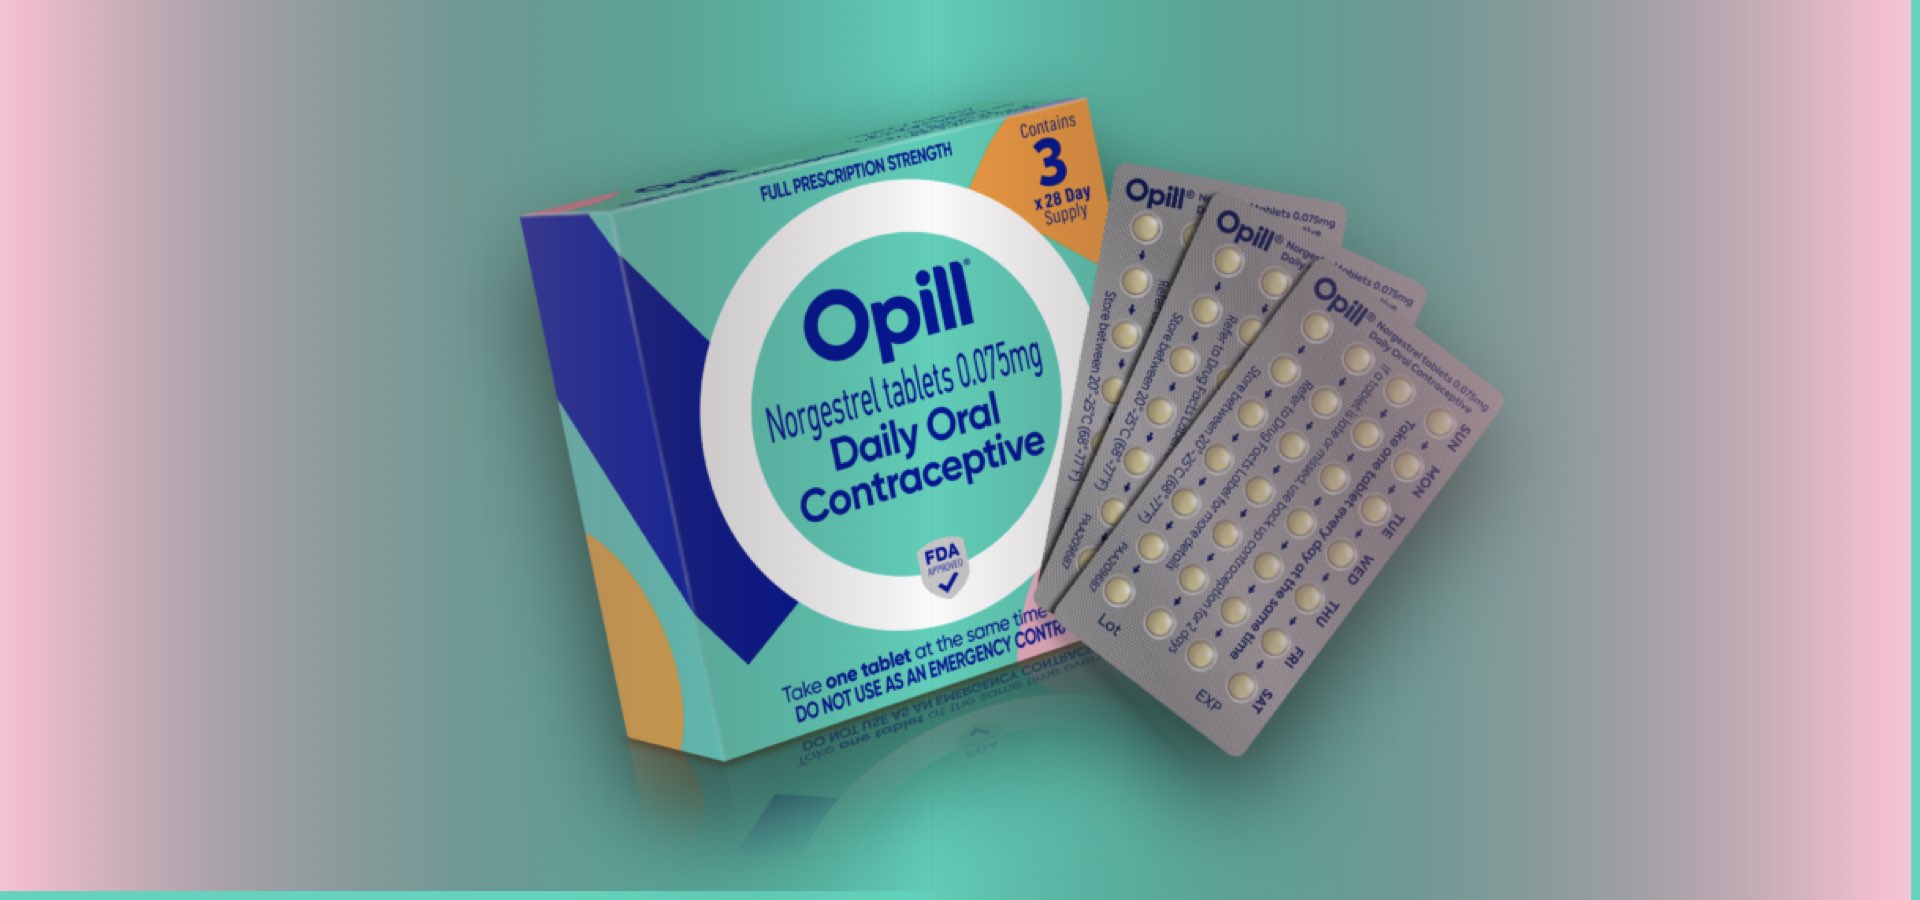 ‎FDA-Approves-Opill-as-First-Over-the-Counter-Daily-Oral-Contraceptive-Expanding-Access-to-Birth-Control.‎001